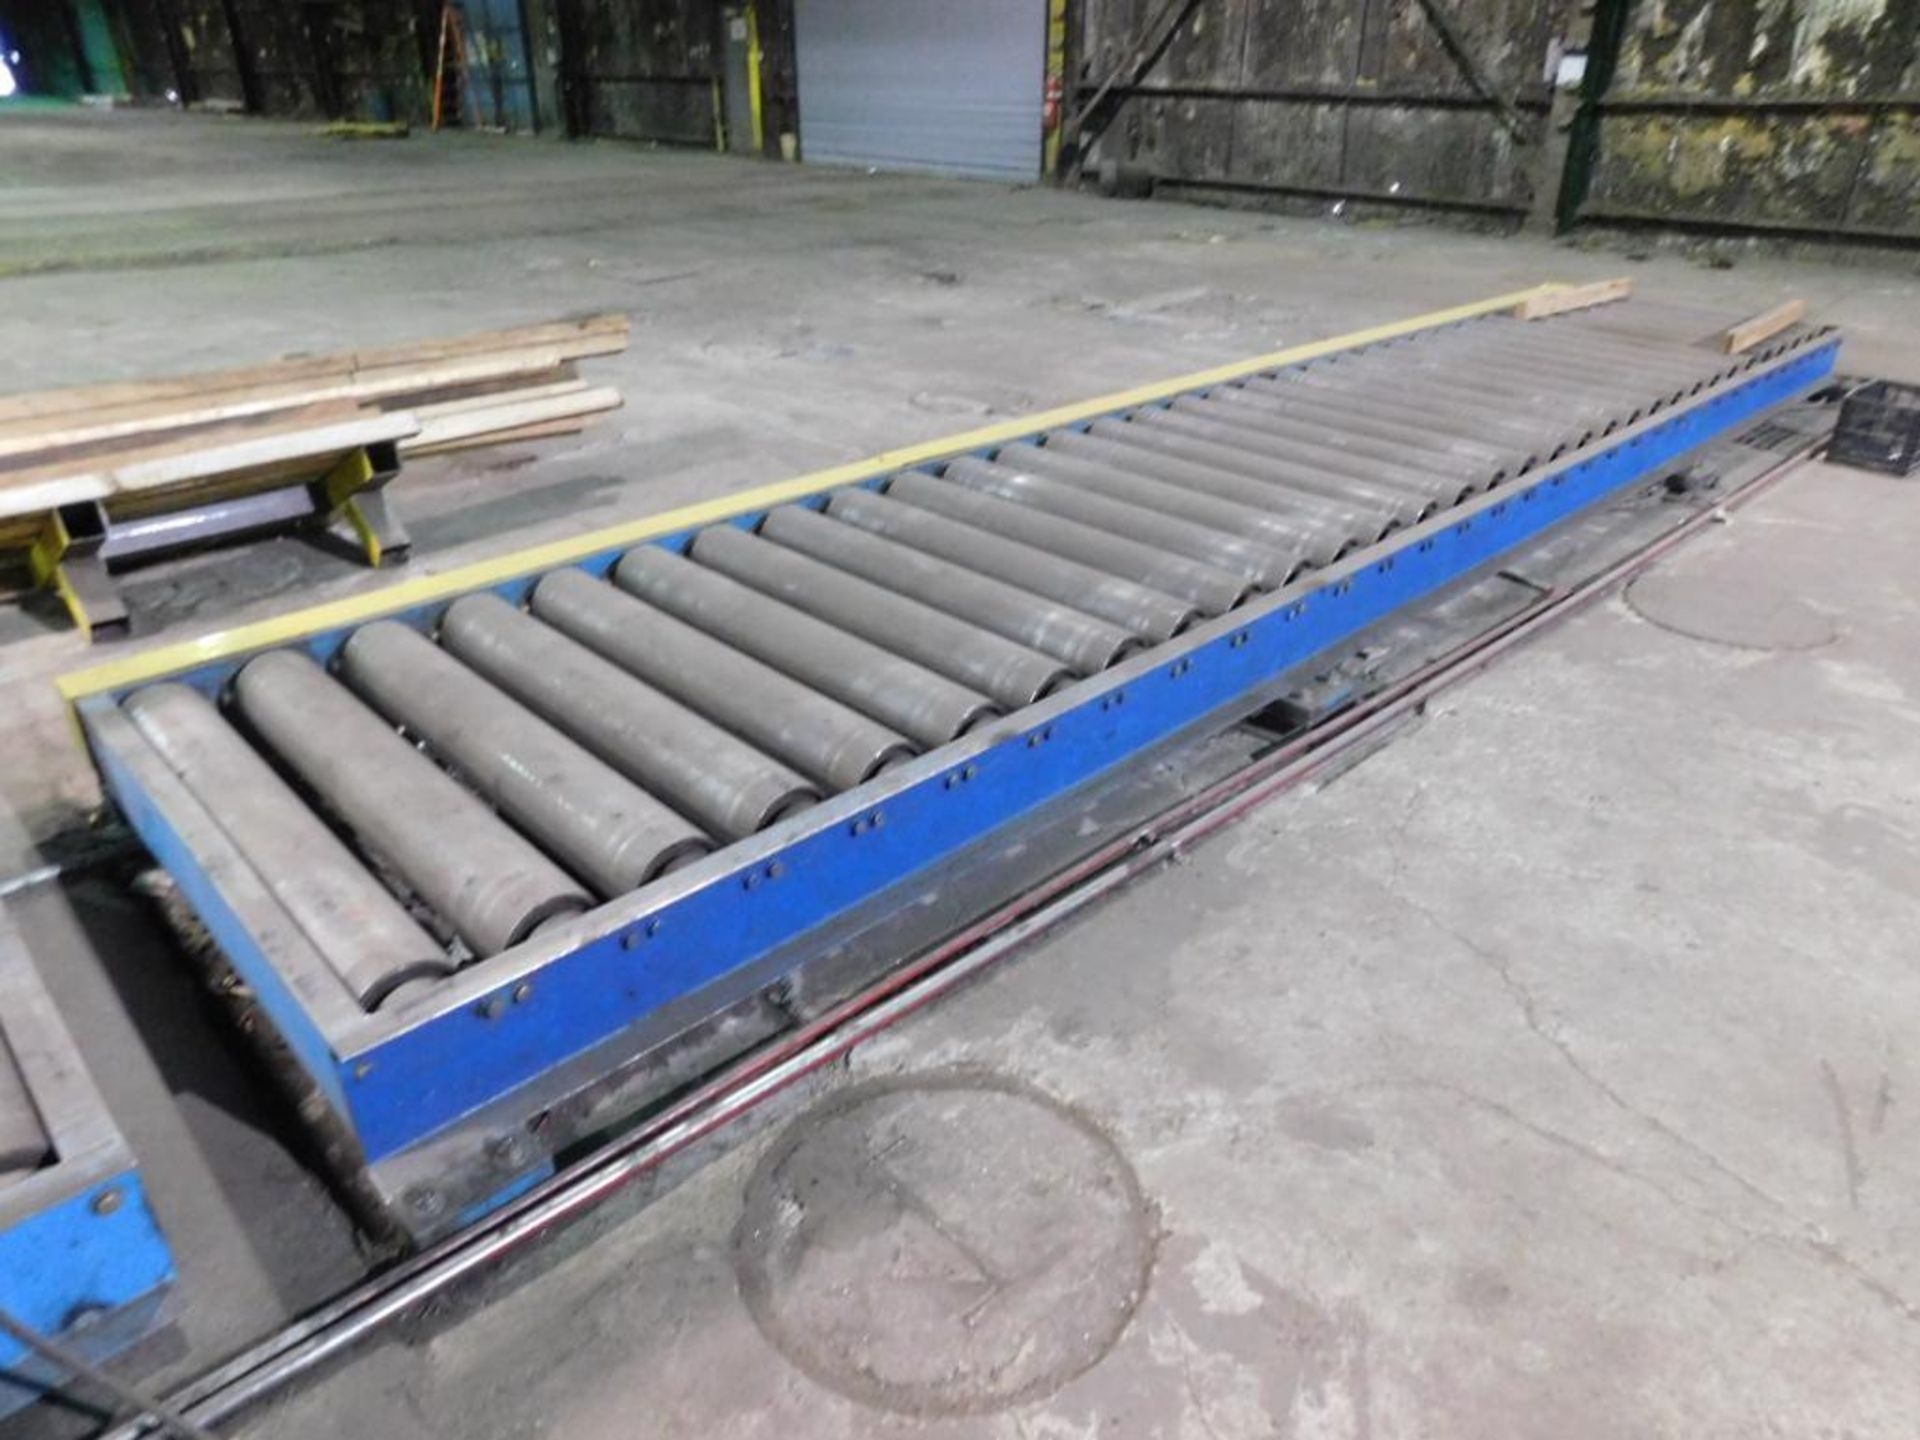 Cauffiel 96" x .500" x 100,000 lb. Flying Shear Cut To Length Line, L-R Line Direction, Carbon Steel - Image 22 of 47